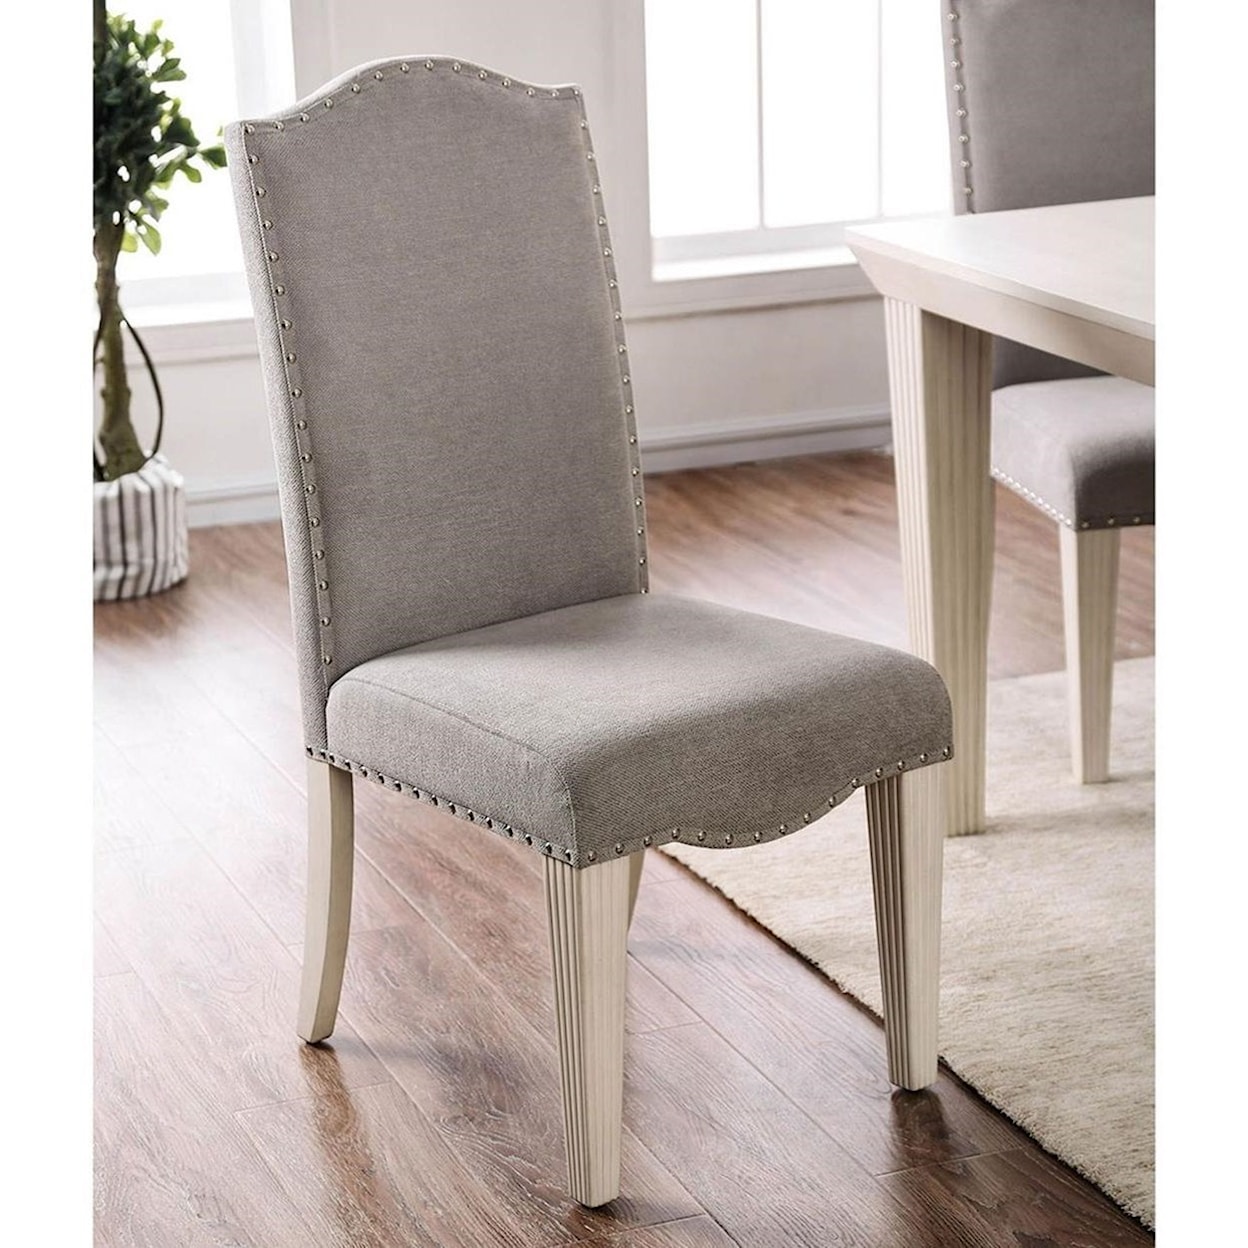 Furniture of America Daniella Set of 2 Upholstered Side Chairs